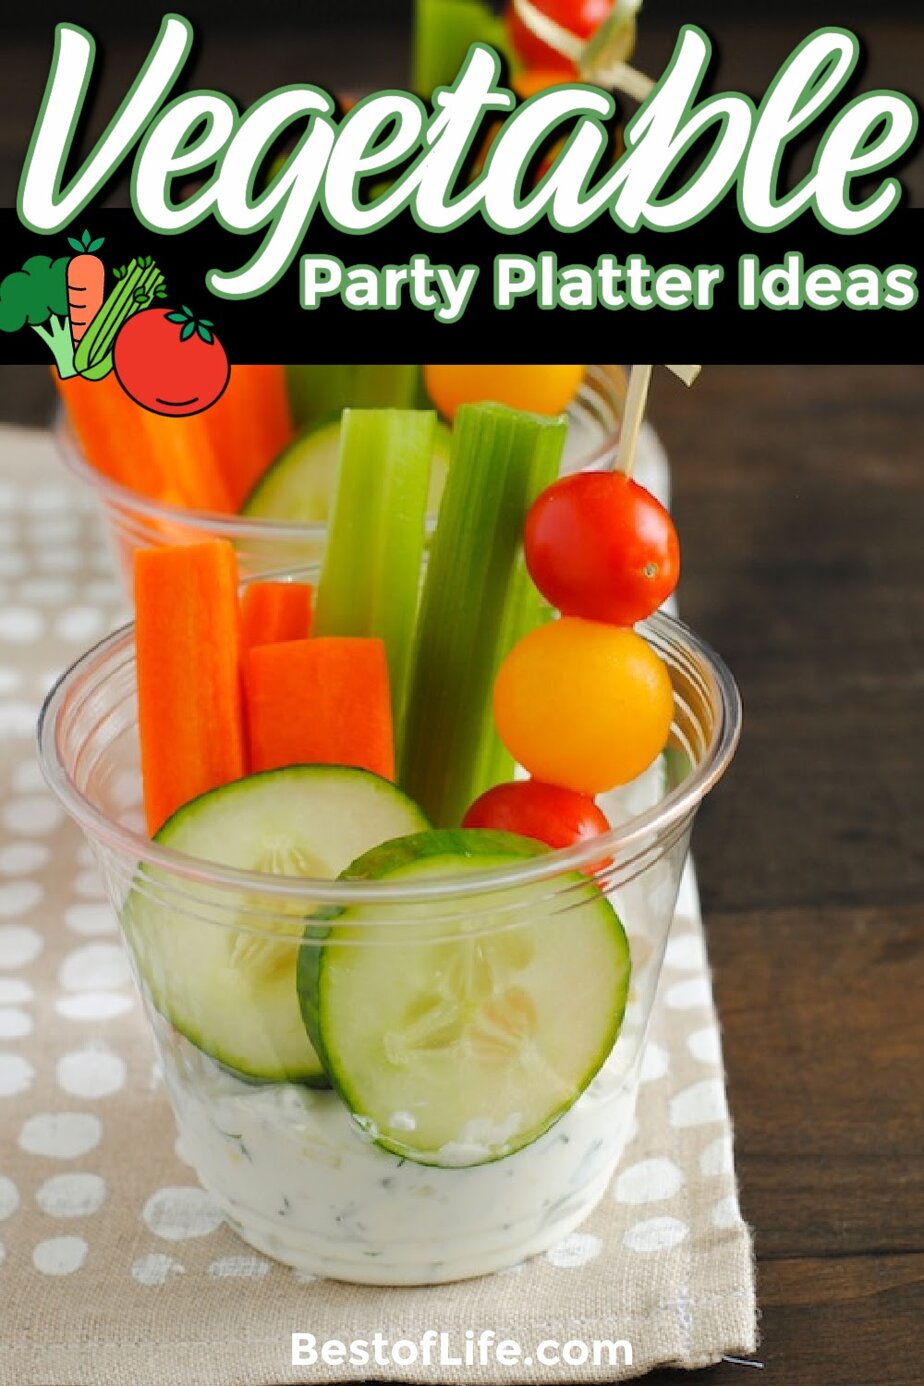 Whether entertaining a few friends, your family, or a crowd, a vegetable platter is a must have party food! These vegetable platter ideas will help you display them perfectly for the occasion. Vegetable Platter Display | Vegetable Platter Guide | Entertaining Tips | Party Food | Party Ideas | Party Food Ideas for a Crowd | Easy Party Food Ideas | Party Food Tray Ideas | Tips for Hosting Parties #veggieplatters #healthyrecipes via @thebestoflife